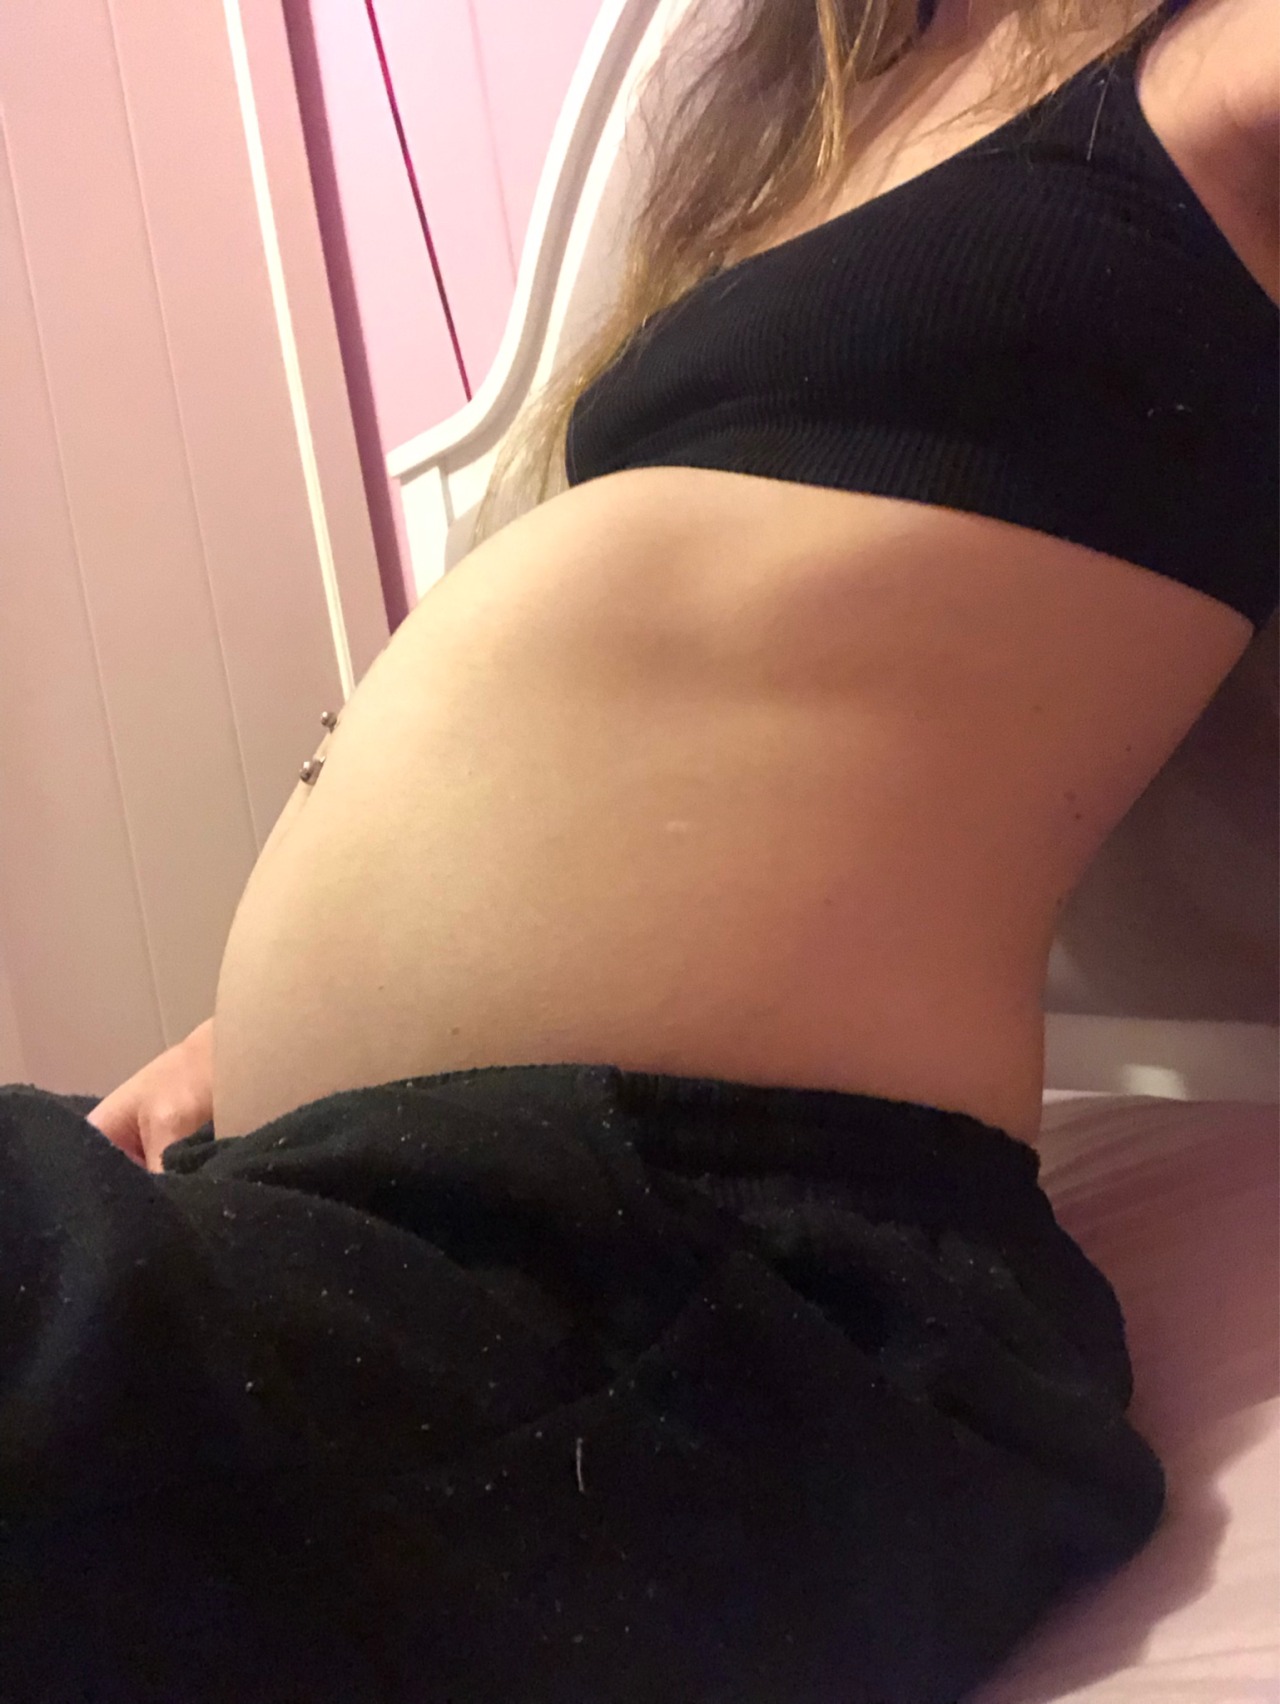 bloatedbelly424:Orb Belly 🤤🤤 My belly is so heavy on my small frame 🤤🤤 very bloated and stuffed feels so good 🤤 so tight and bulged 